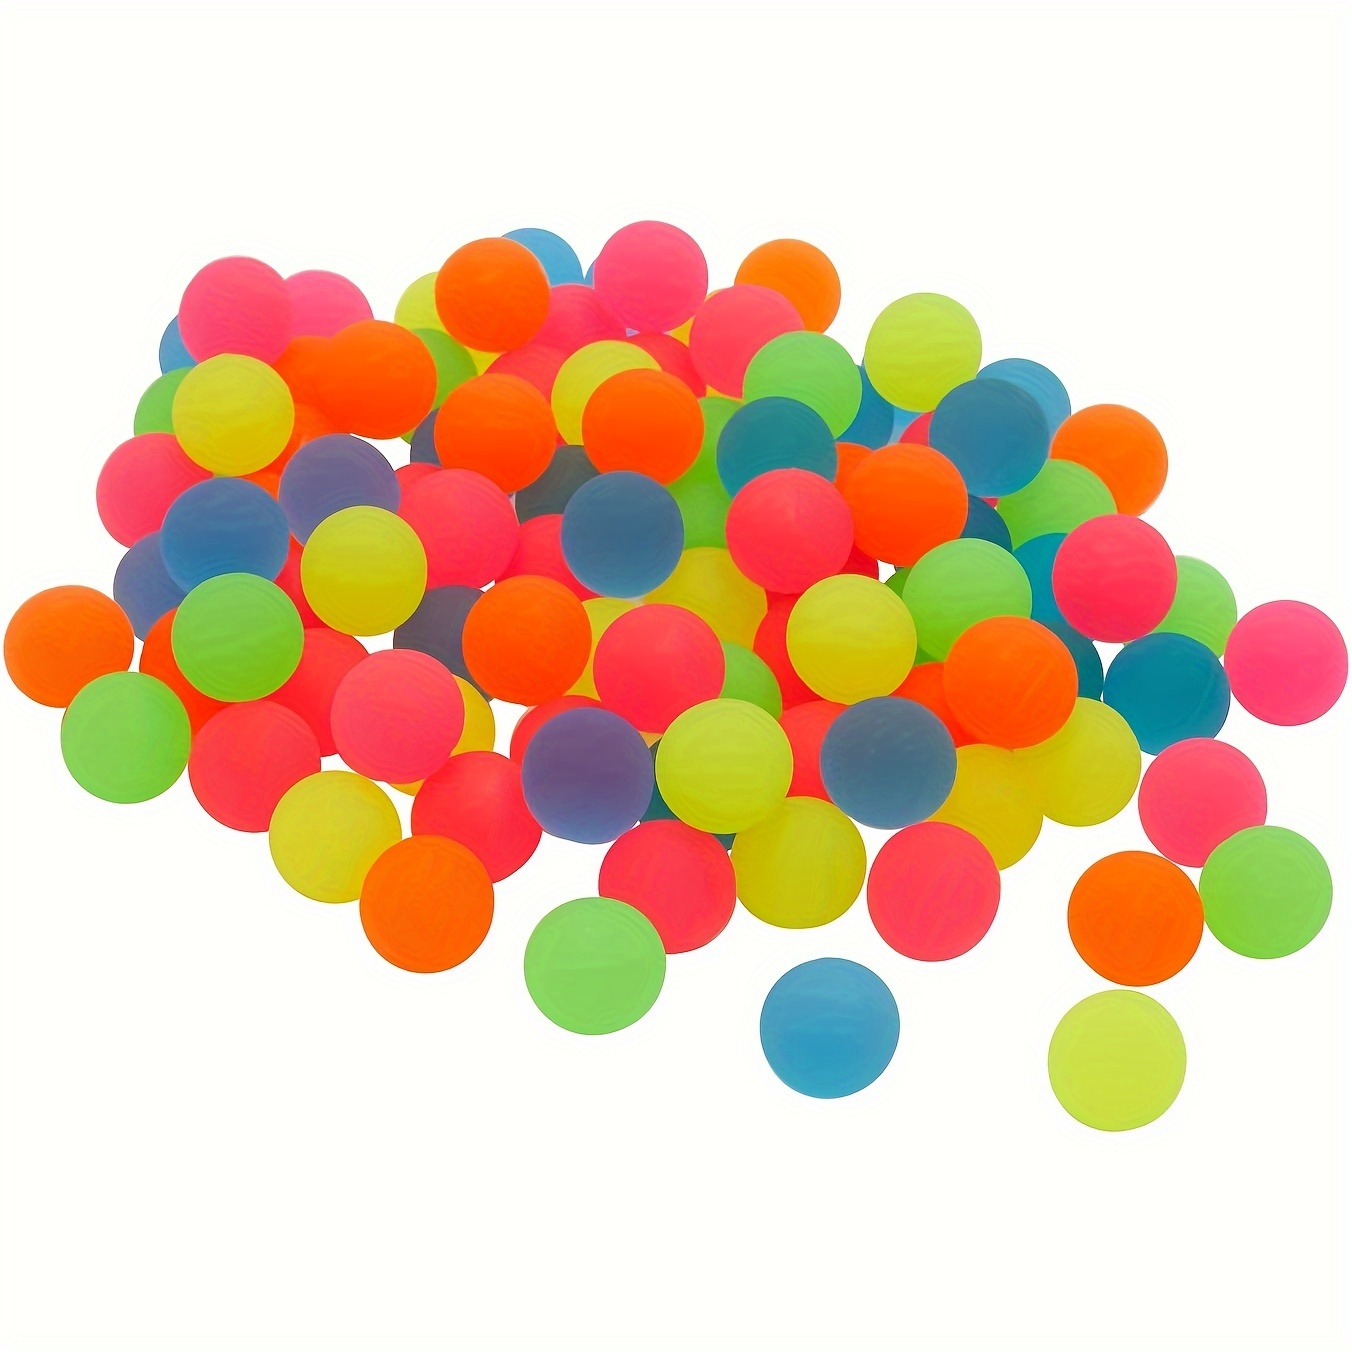 

10pcs Of Glow-in-the-dark Bouncy Ball, Color Random, Rubber Balls, Suitable For Party Gifts, Prizes, Birthday Gift Bags Filling, Easter Gift